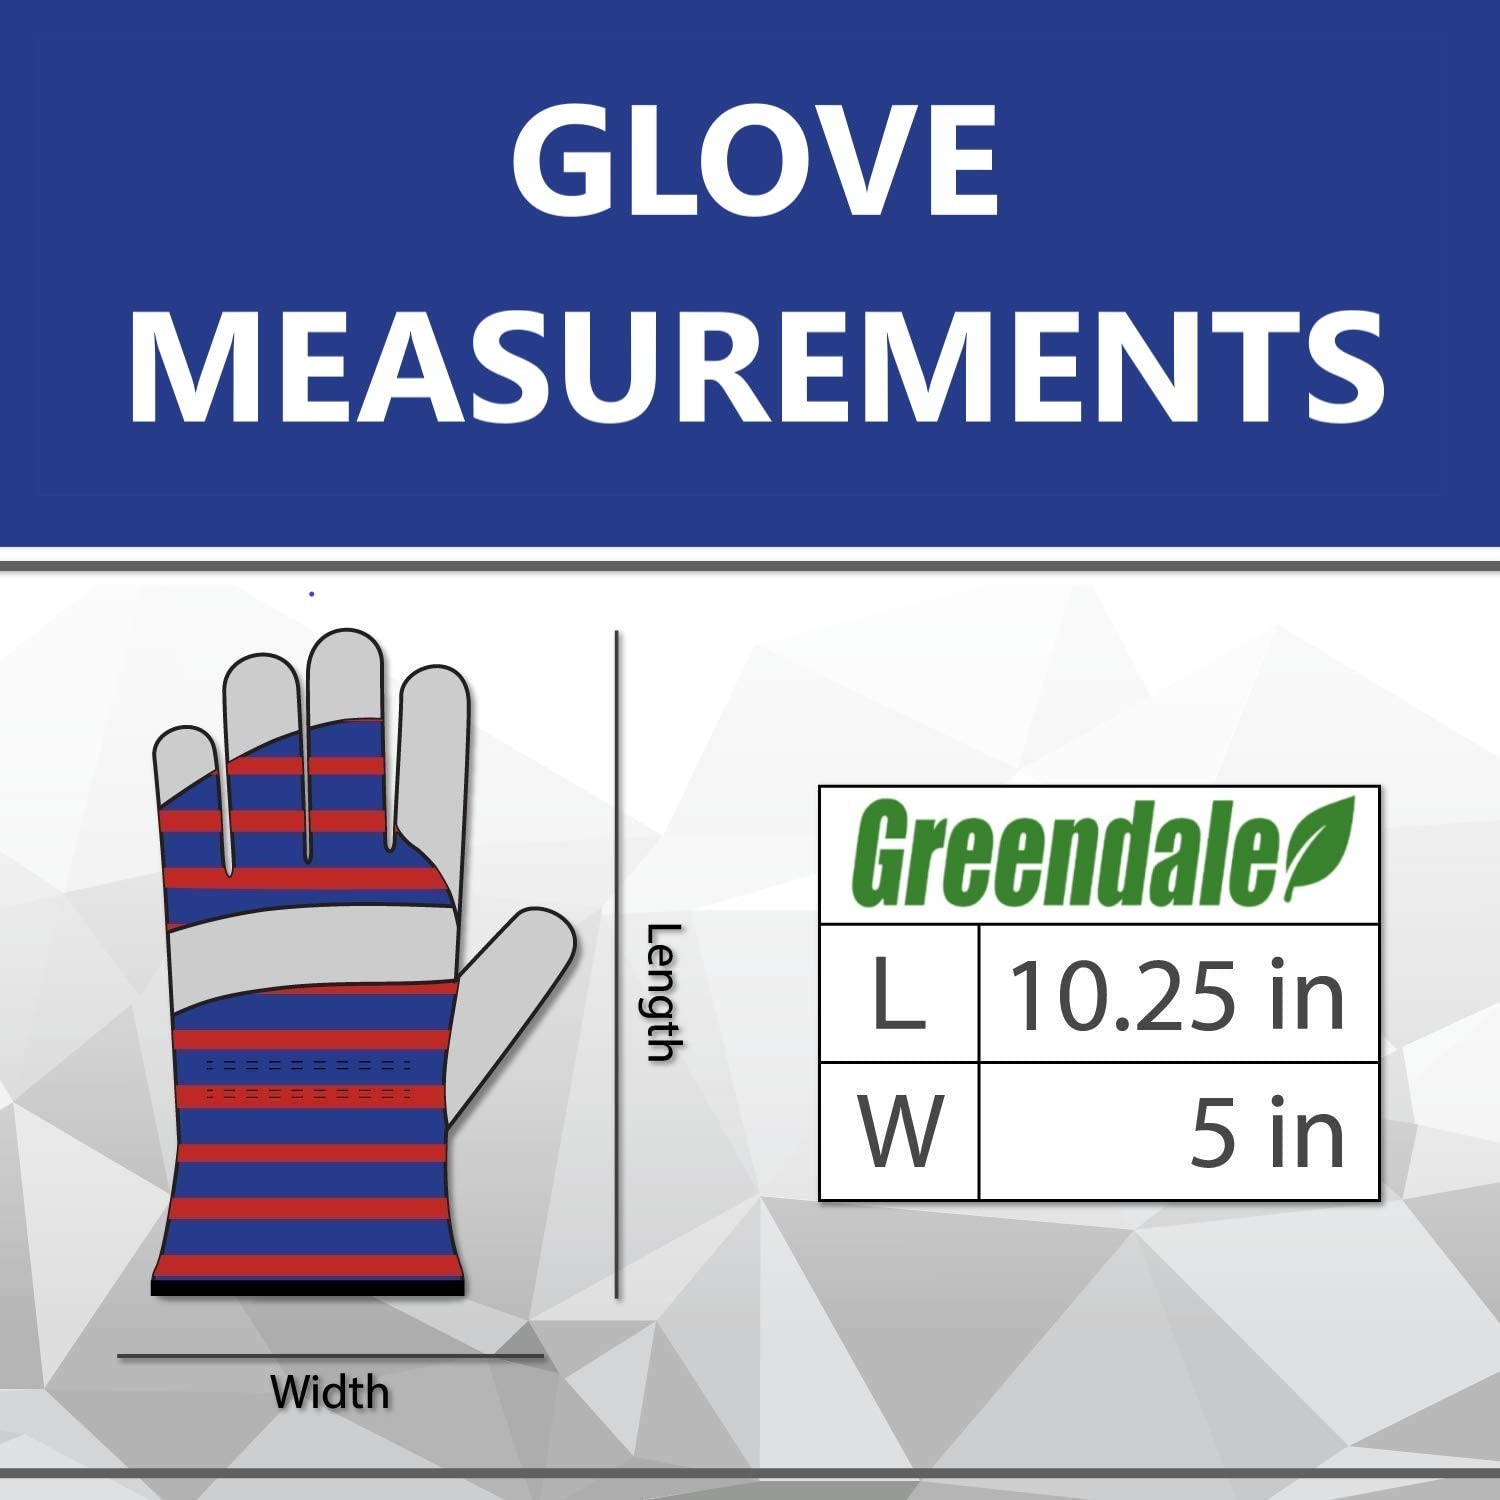 Greendale (3, 6 or 12 Pack - Leather & Cotton Work Gloves - Garage, Yard, Garden, Industrial, Commercial - One Size Fits Most (12, One Size)